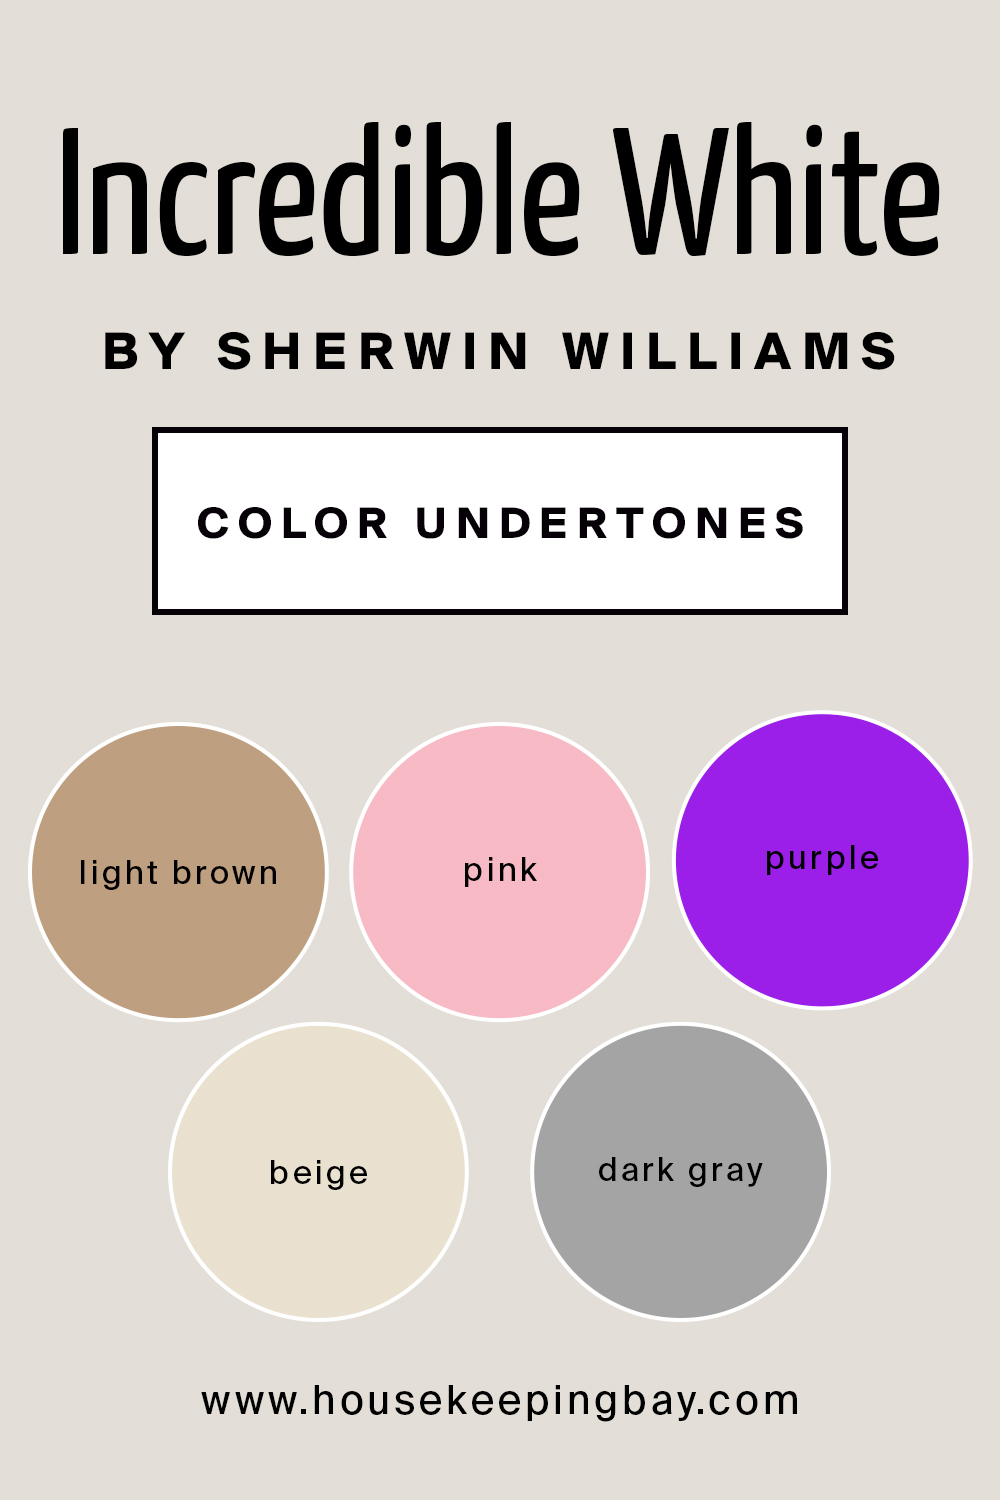 Incredible White by Sherwin Williams Color Undertones